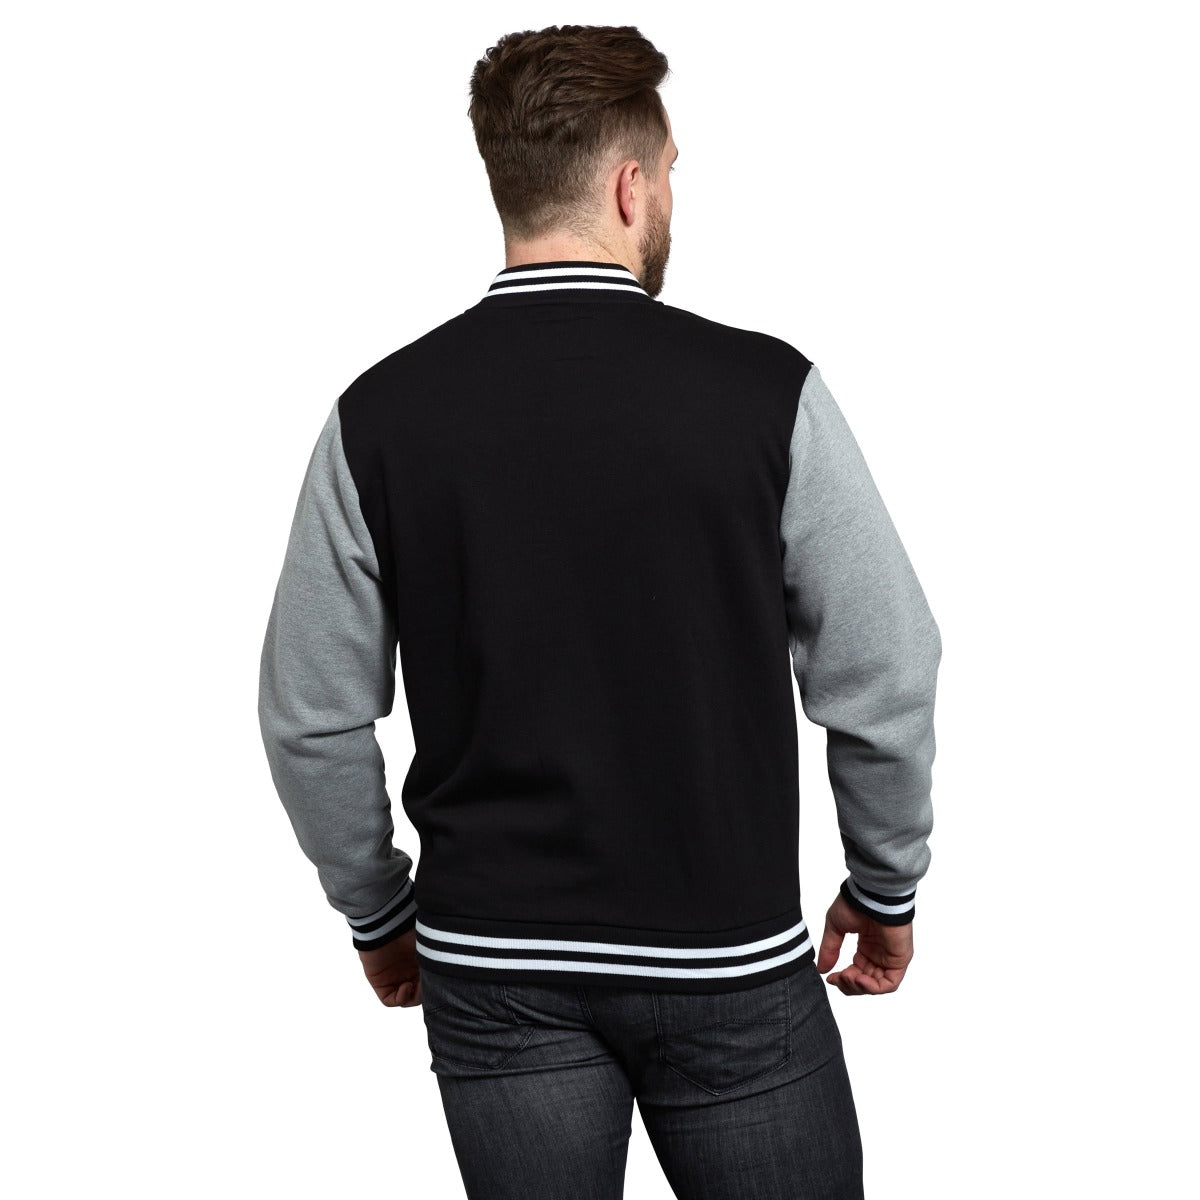 The back view of a man wearing a black and grey Guinness Letterman Jacket.